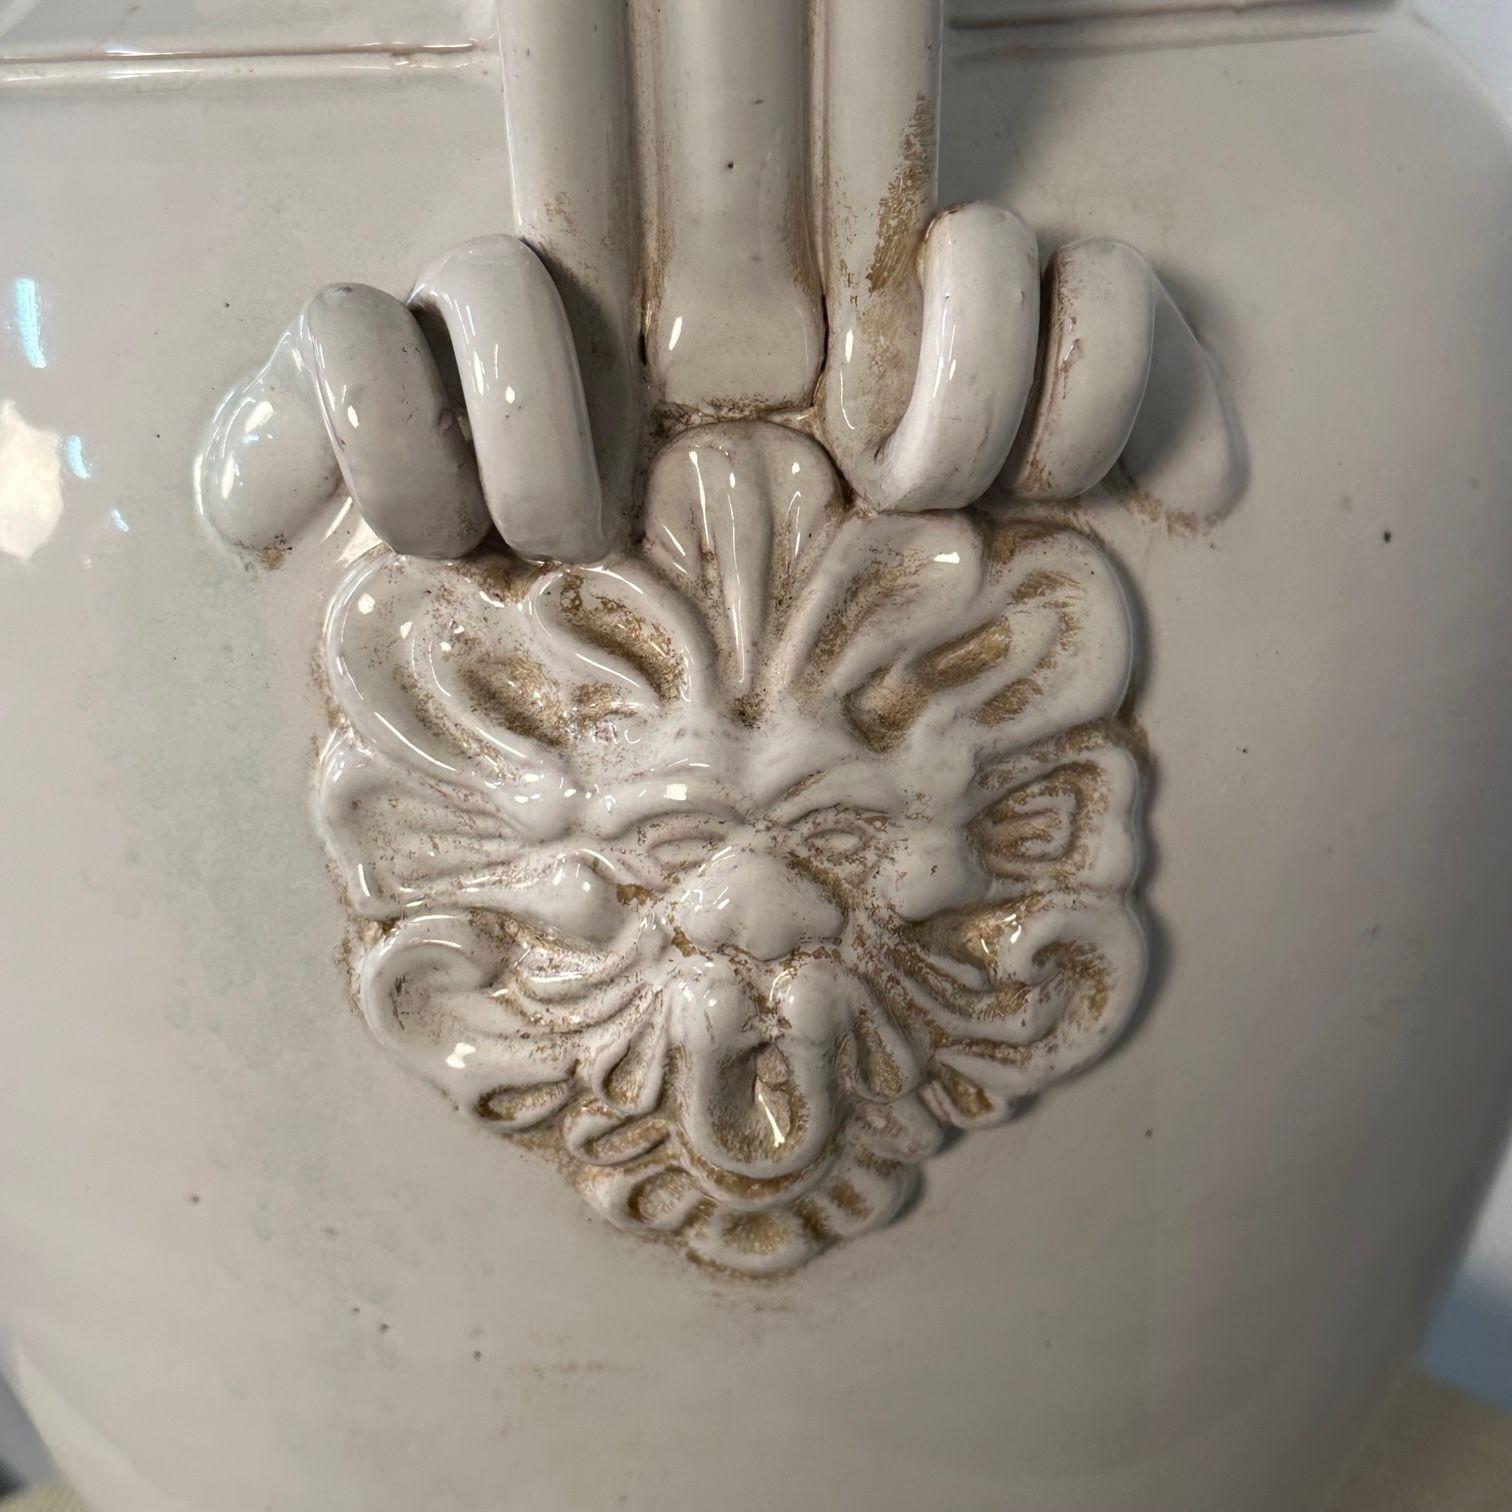 Tri-Handle Large White Ceramic Jug / Vase / Pottery In Good Condition For Sale In Stamford, CT